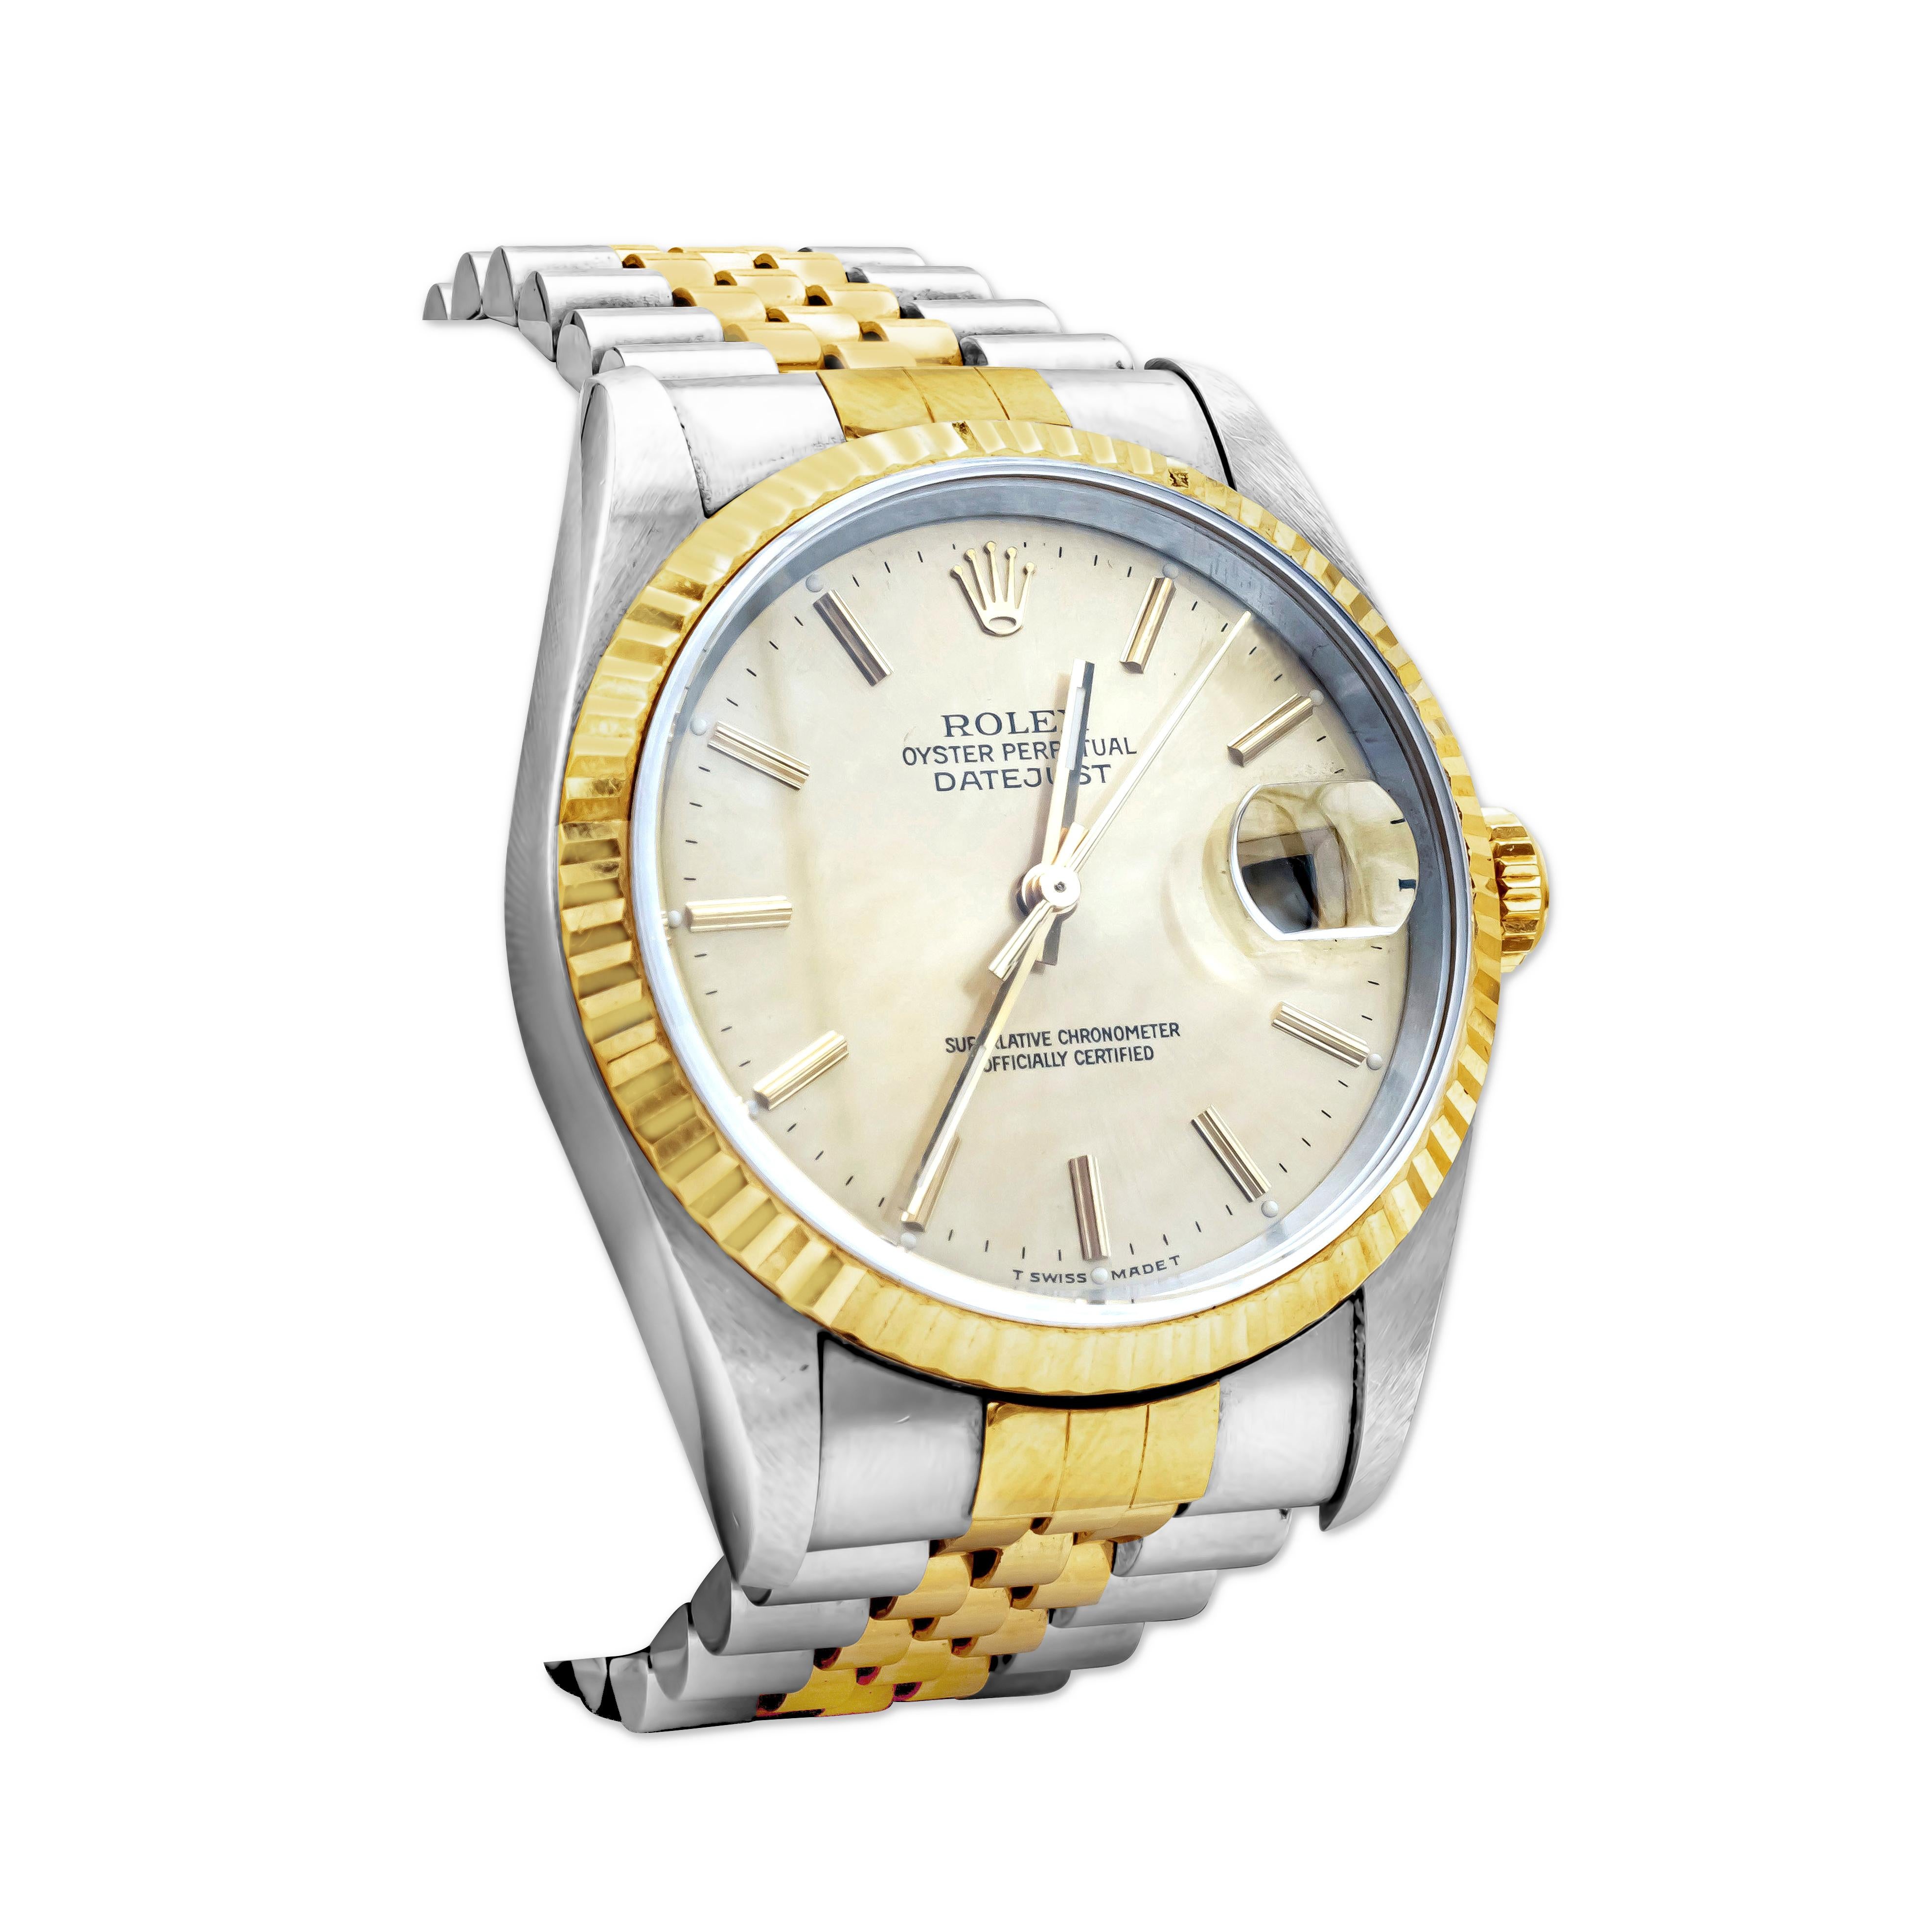 A classic Rolex Datejust (16233), featuring a self-winding automatic watch with a 36 mm stainless steel case and an 18K yellow gold fluted bezel. A Rolex jubilee of 18K yellow gold and stainless steel with deployment buckle. Other features include a